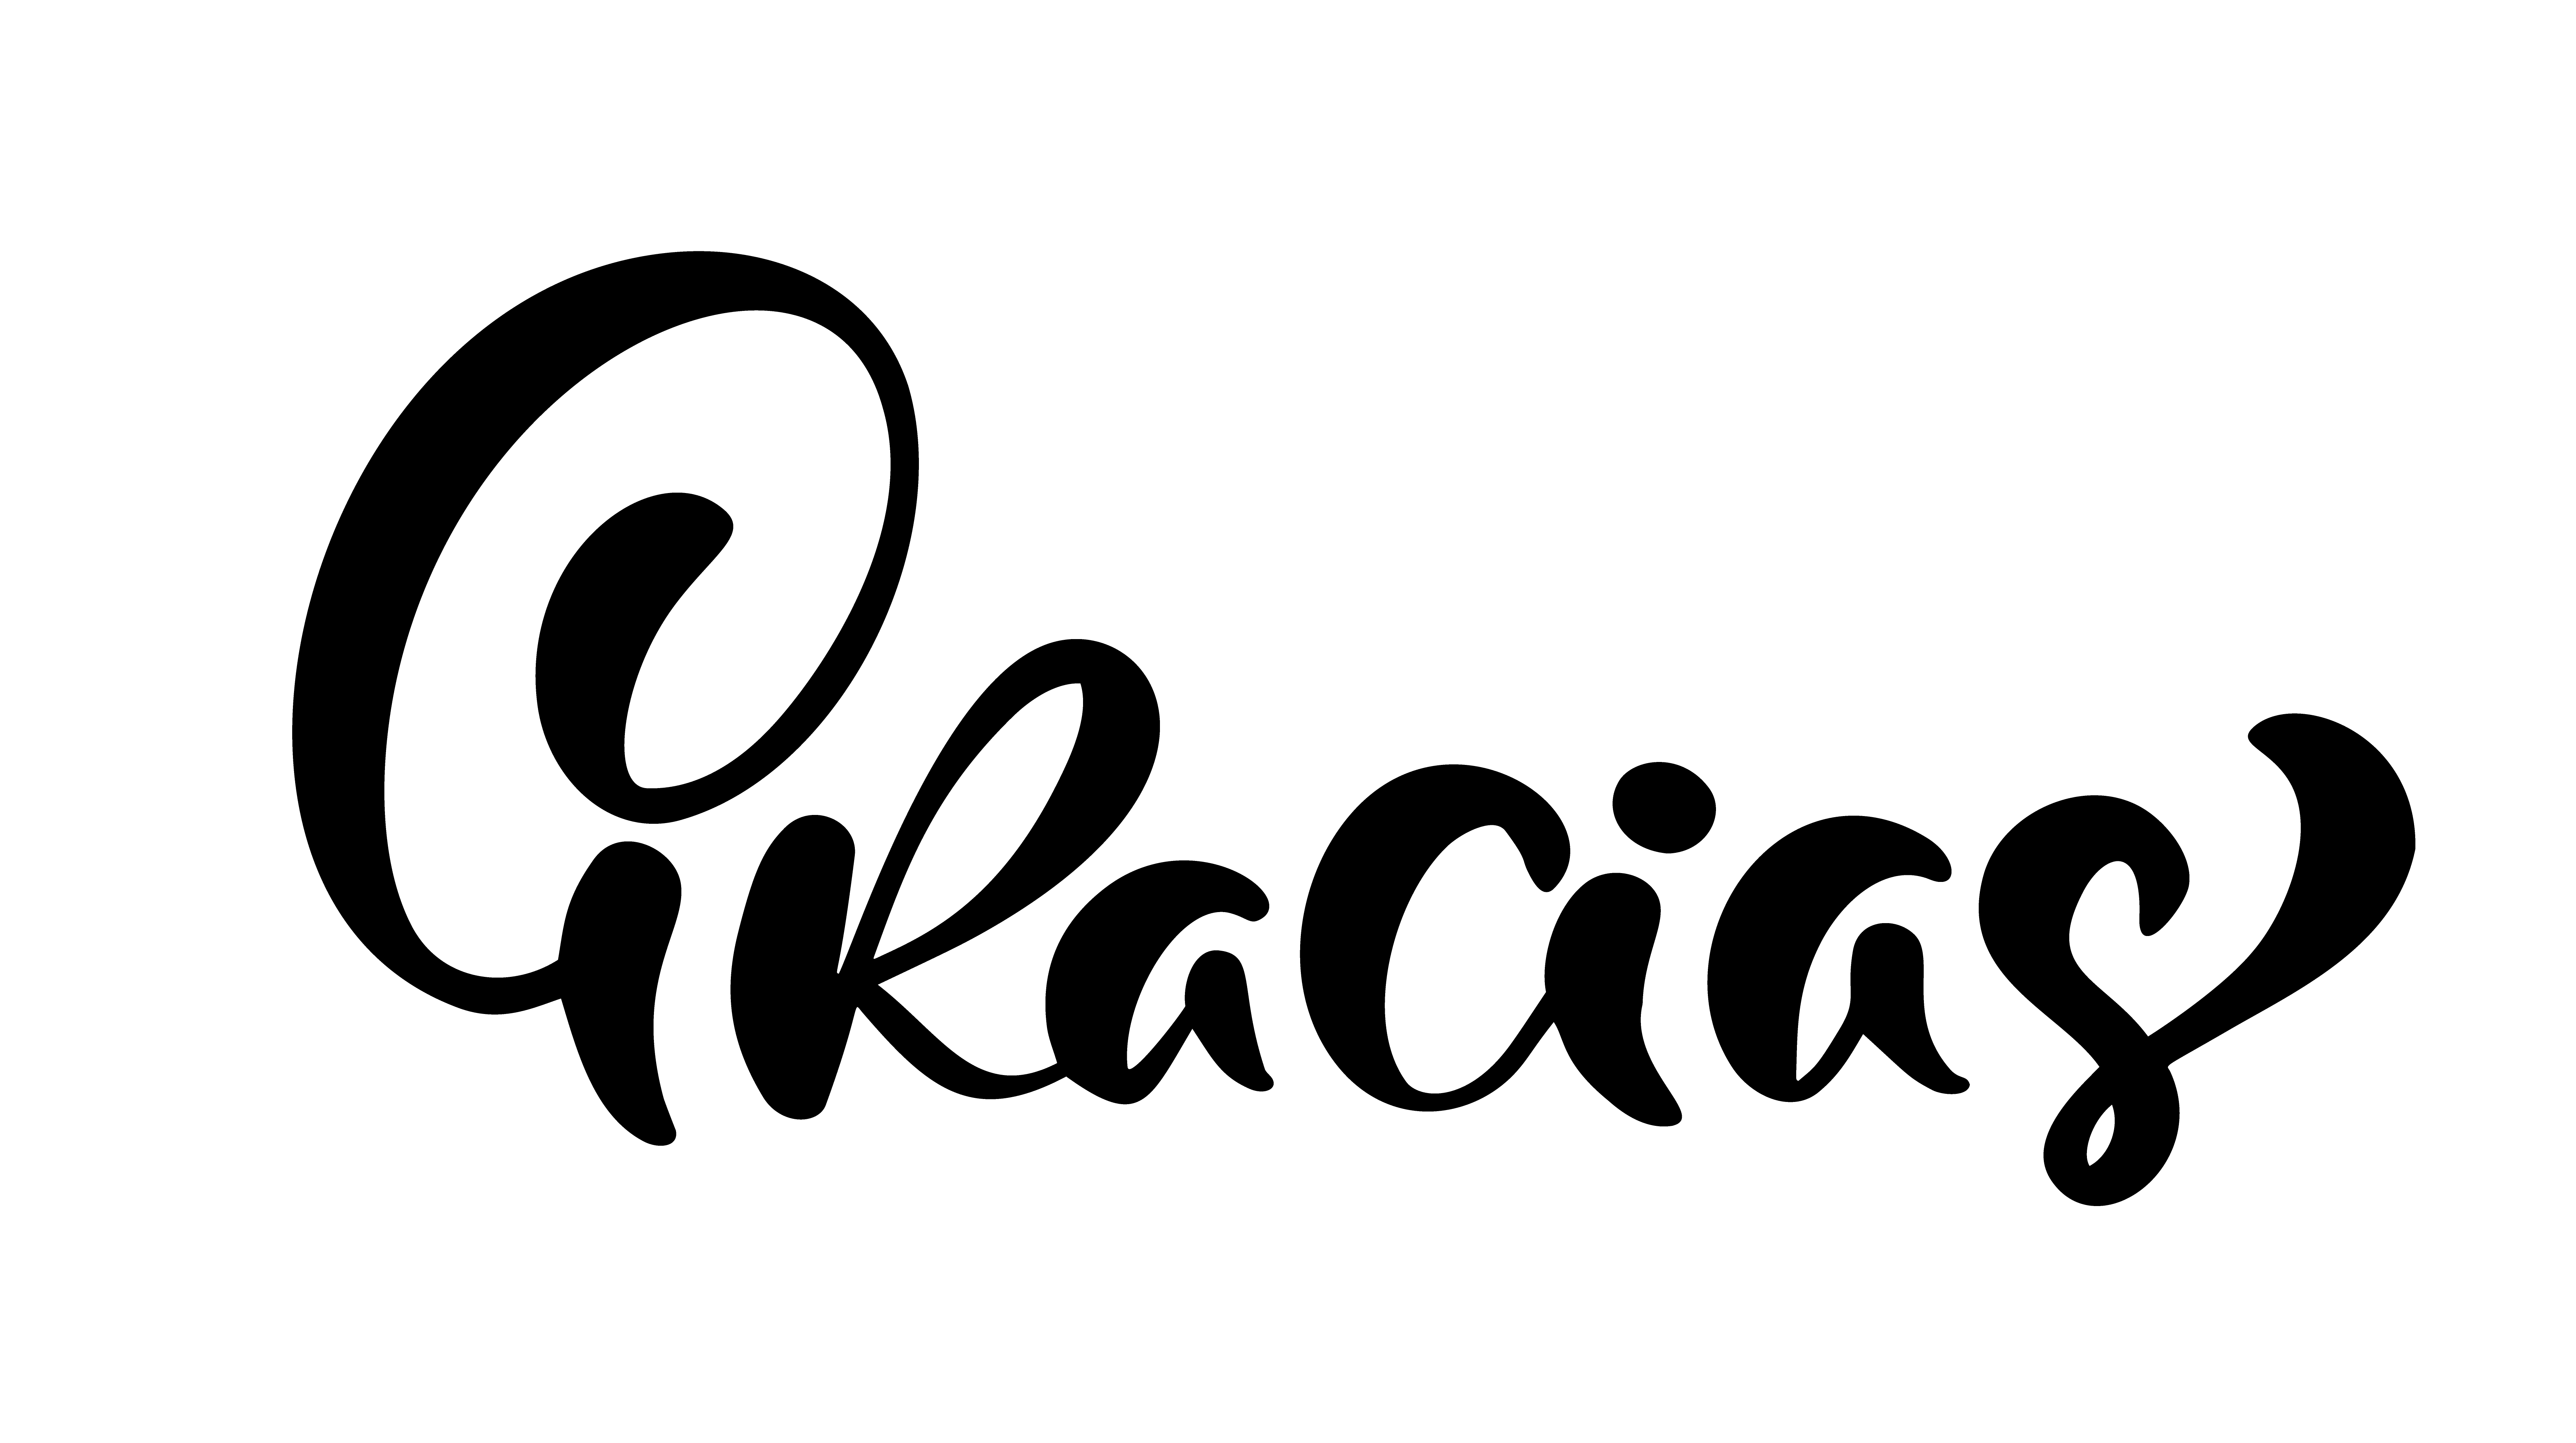 "Gracias" ("Thank you" in Spanish) hand written lettering 375756 Vector